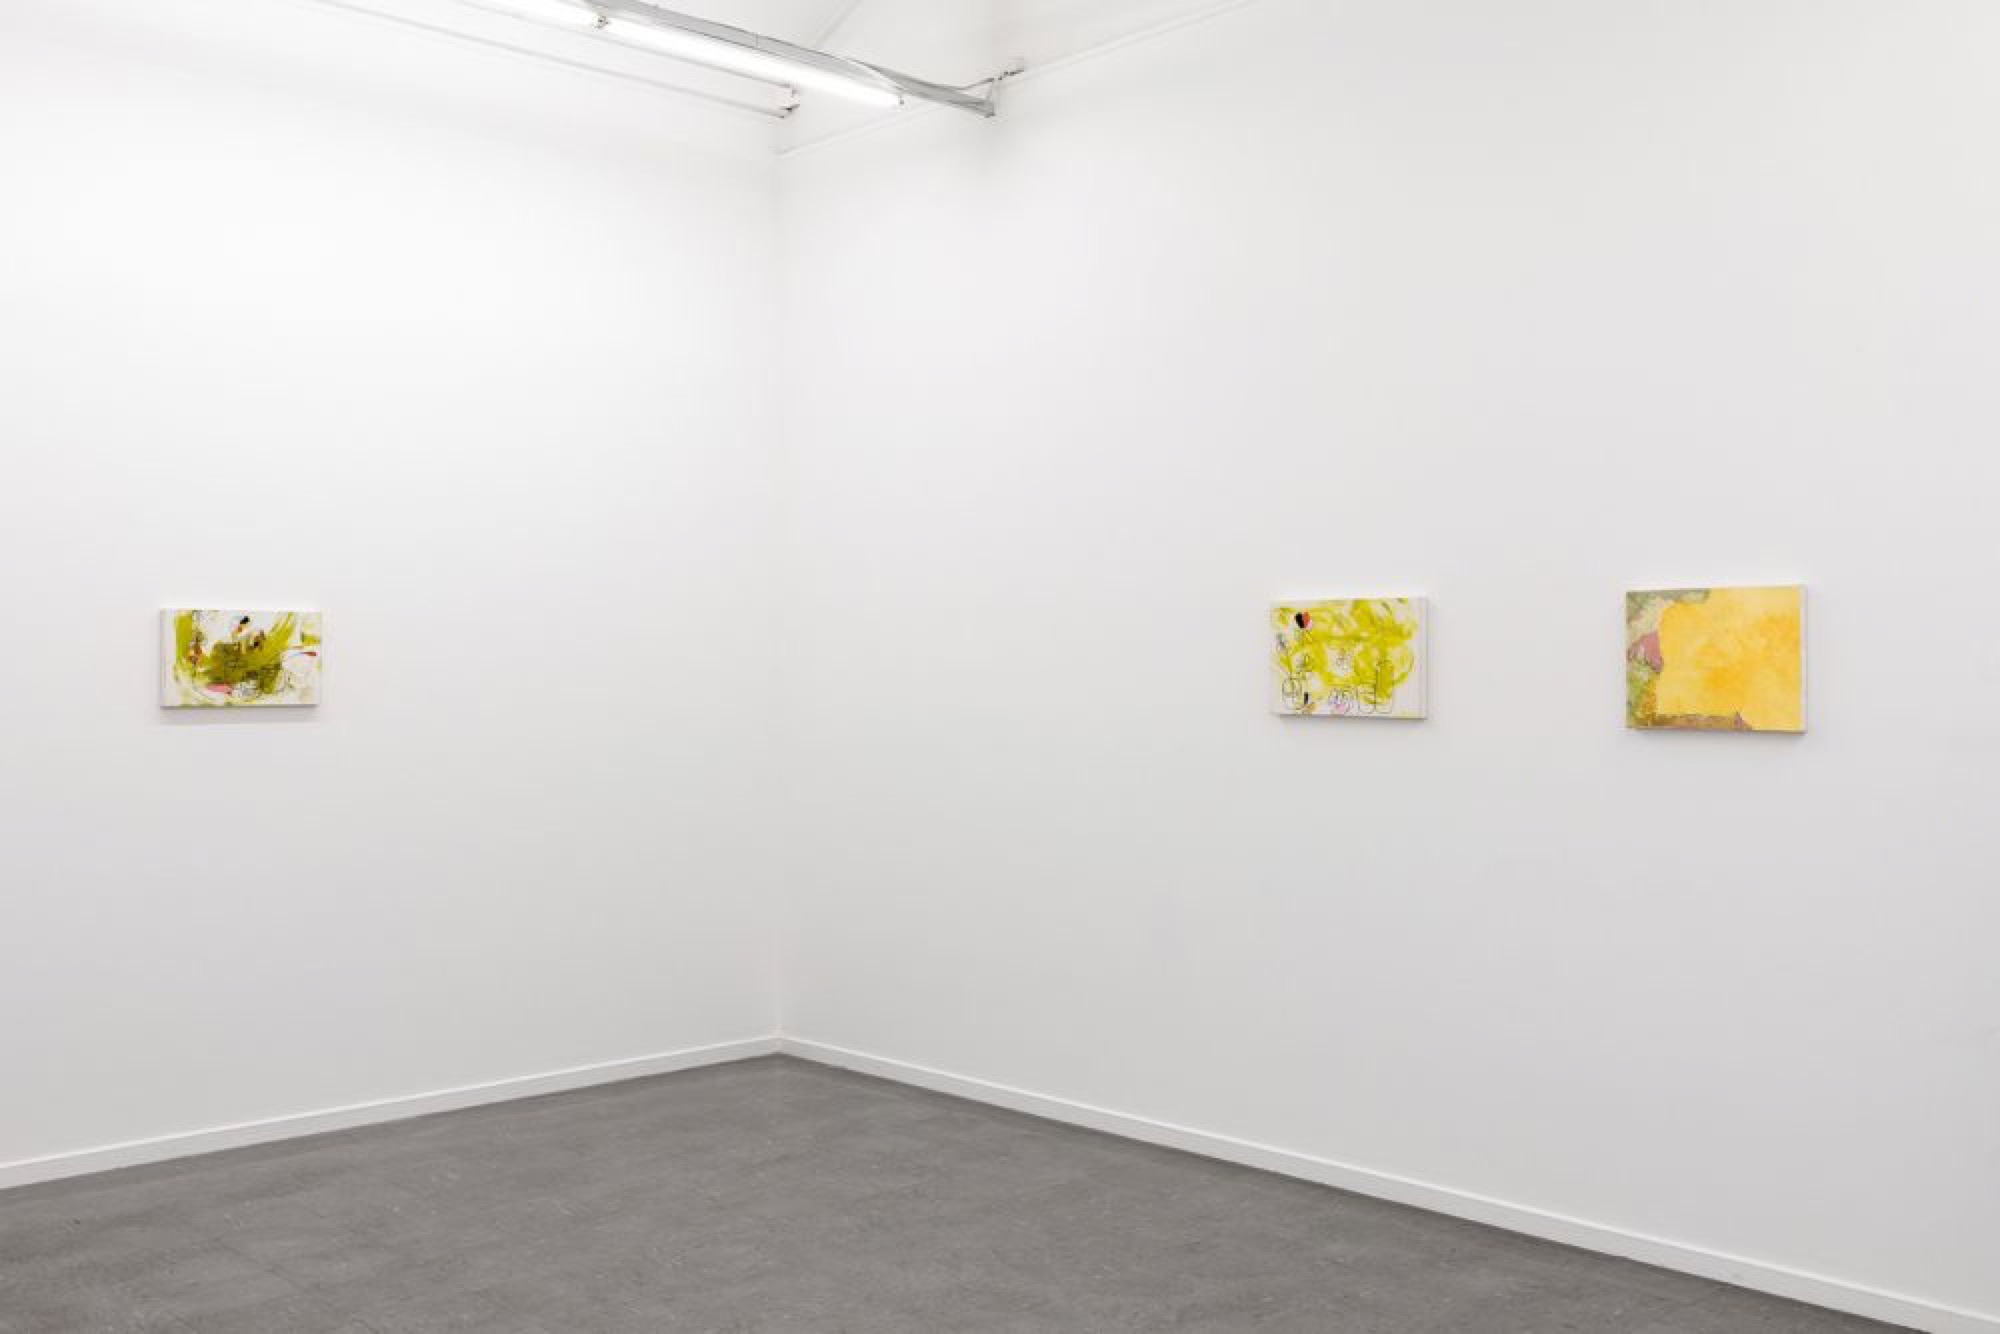 Kate Smith, <em>An Impression of an impression,</em> 2017, installation view. Photo credit: Andrew Curtis.